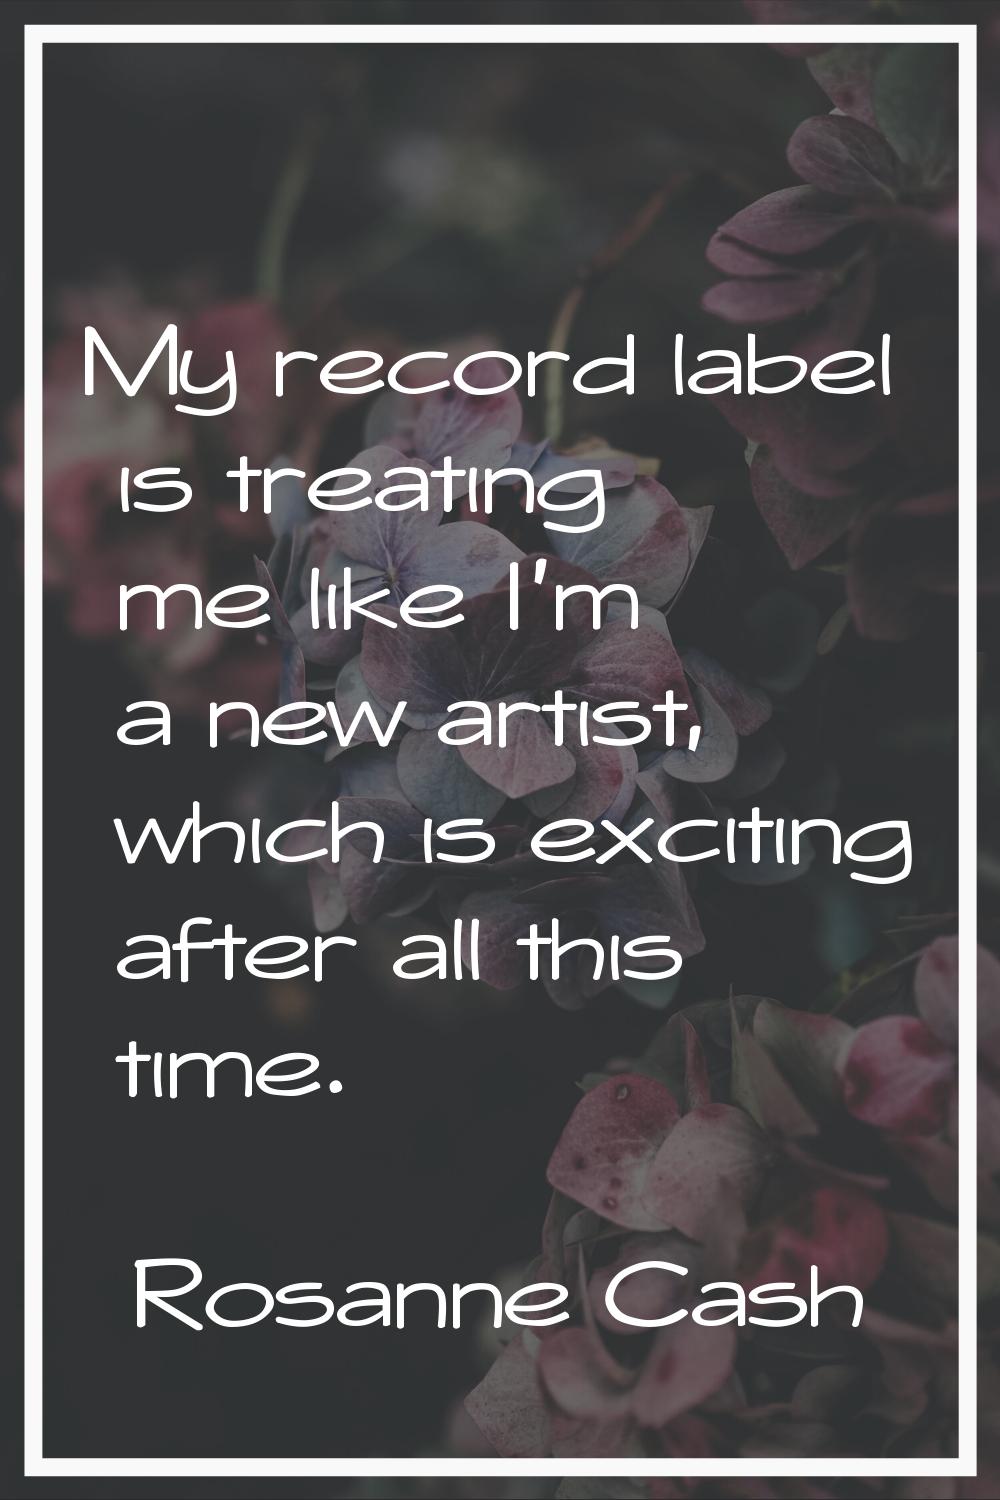 My record label is treating me like I'm a new artist, which is exciting after all this time.